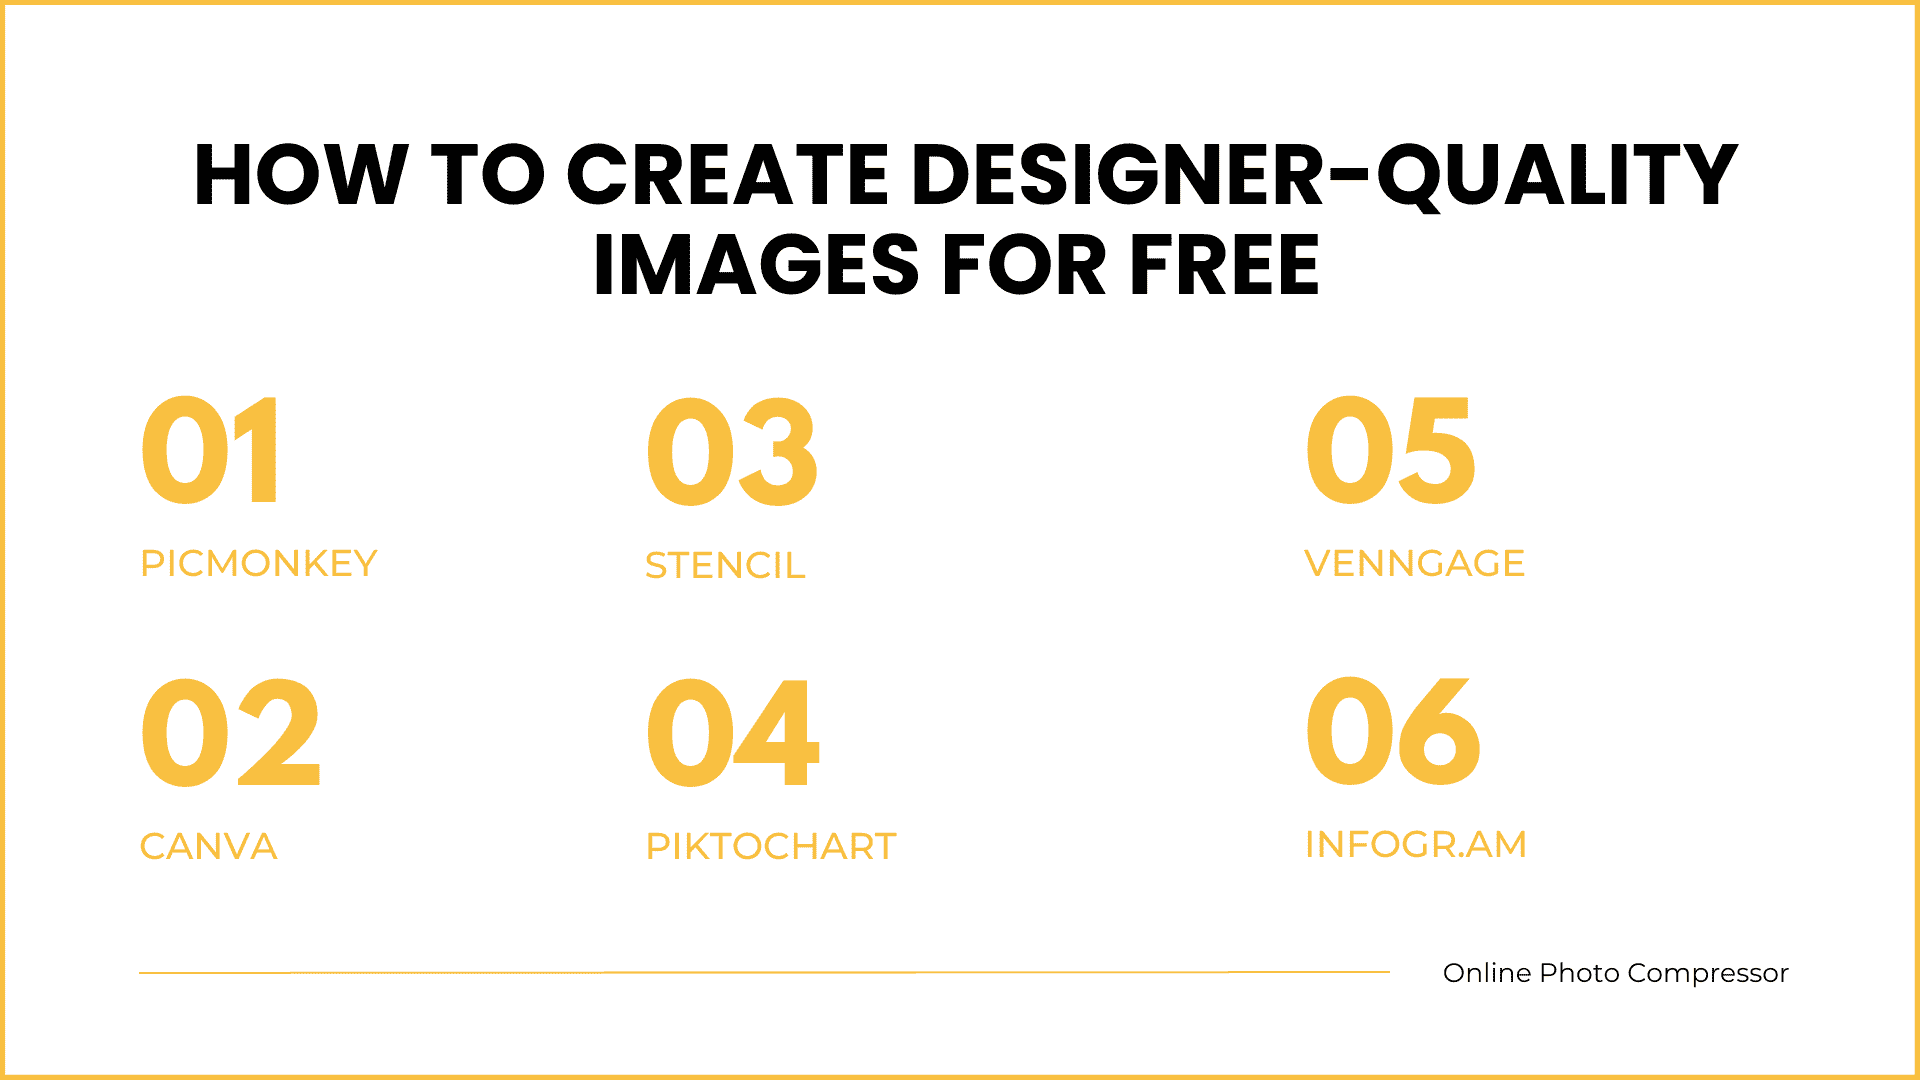 How to Create Designer-Quality Images for Free